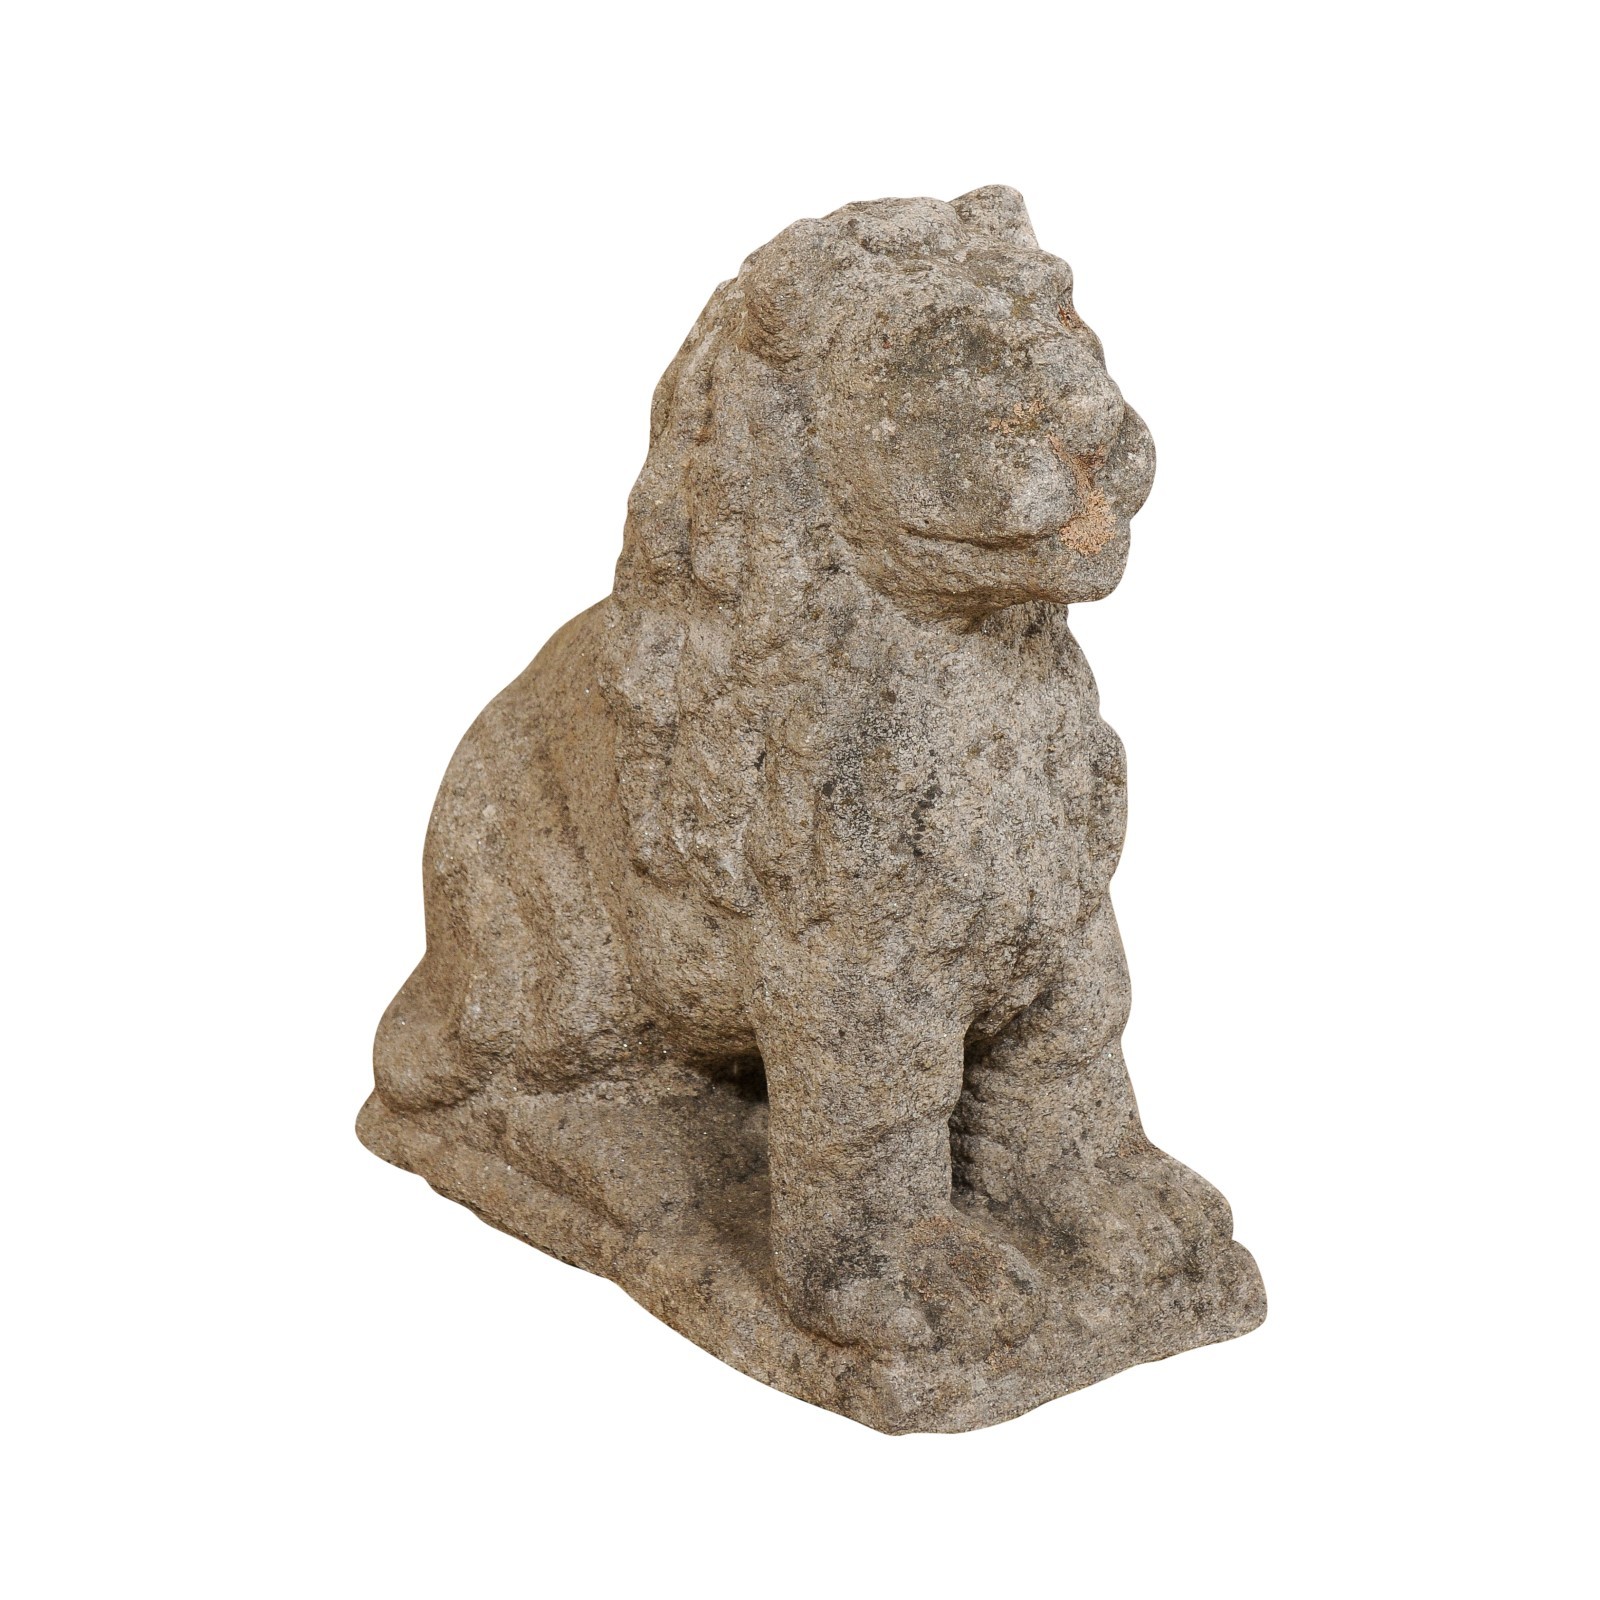 An 18th c. Hand-Carved Stone Lion, 25" Tall